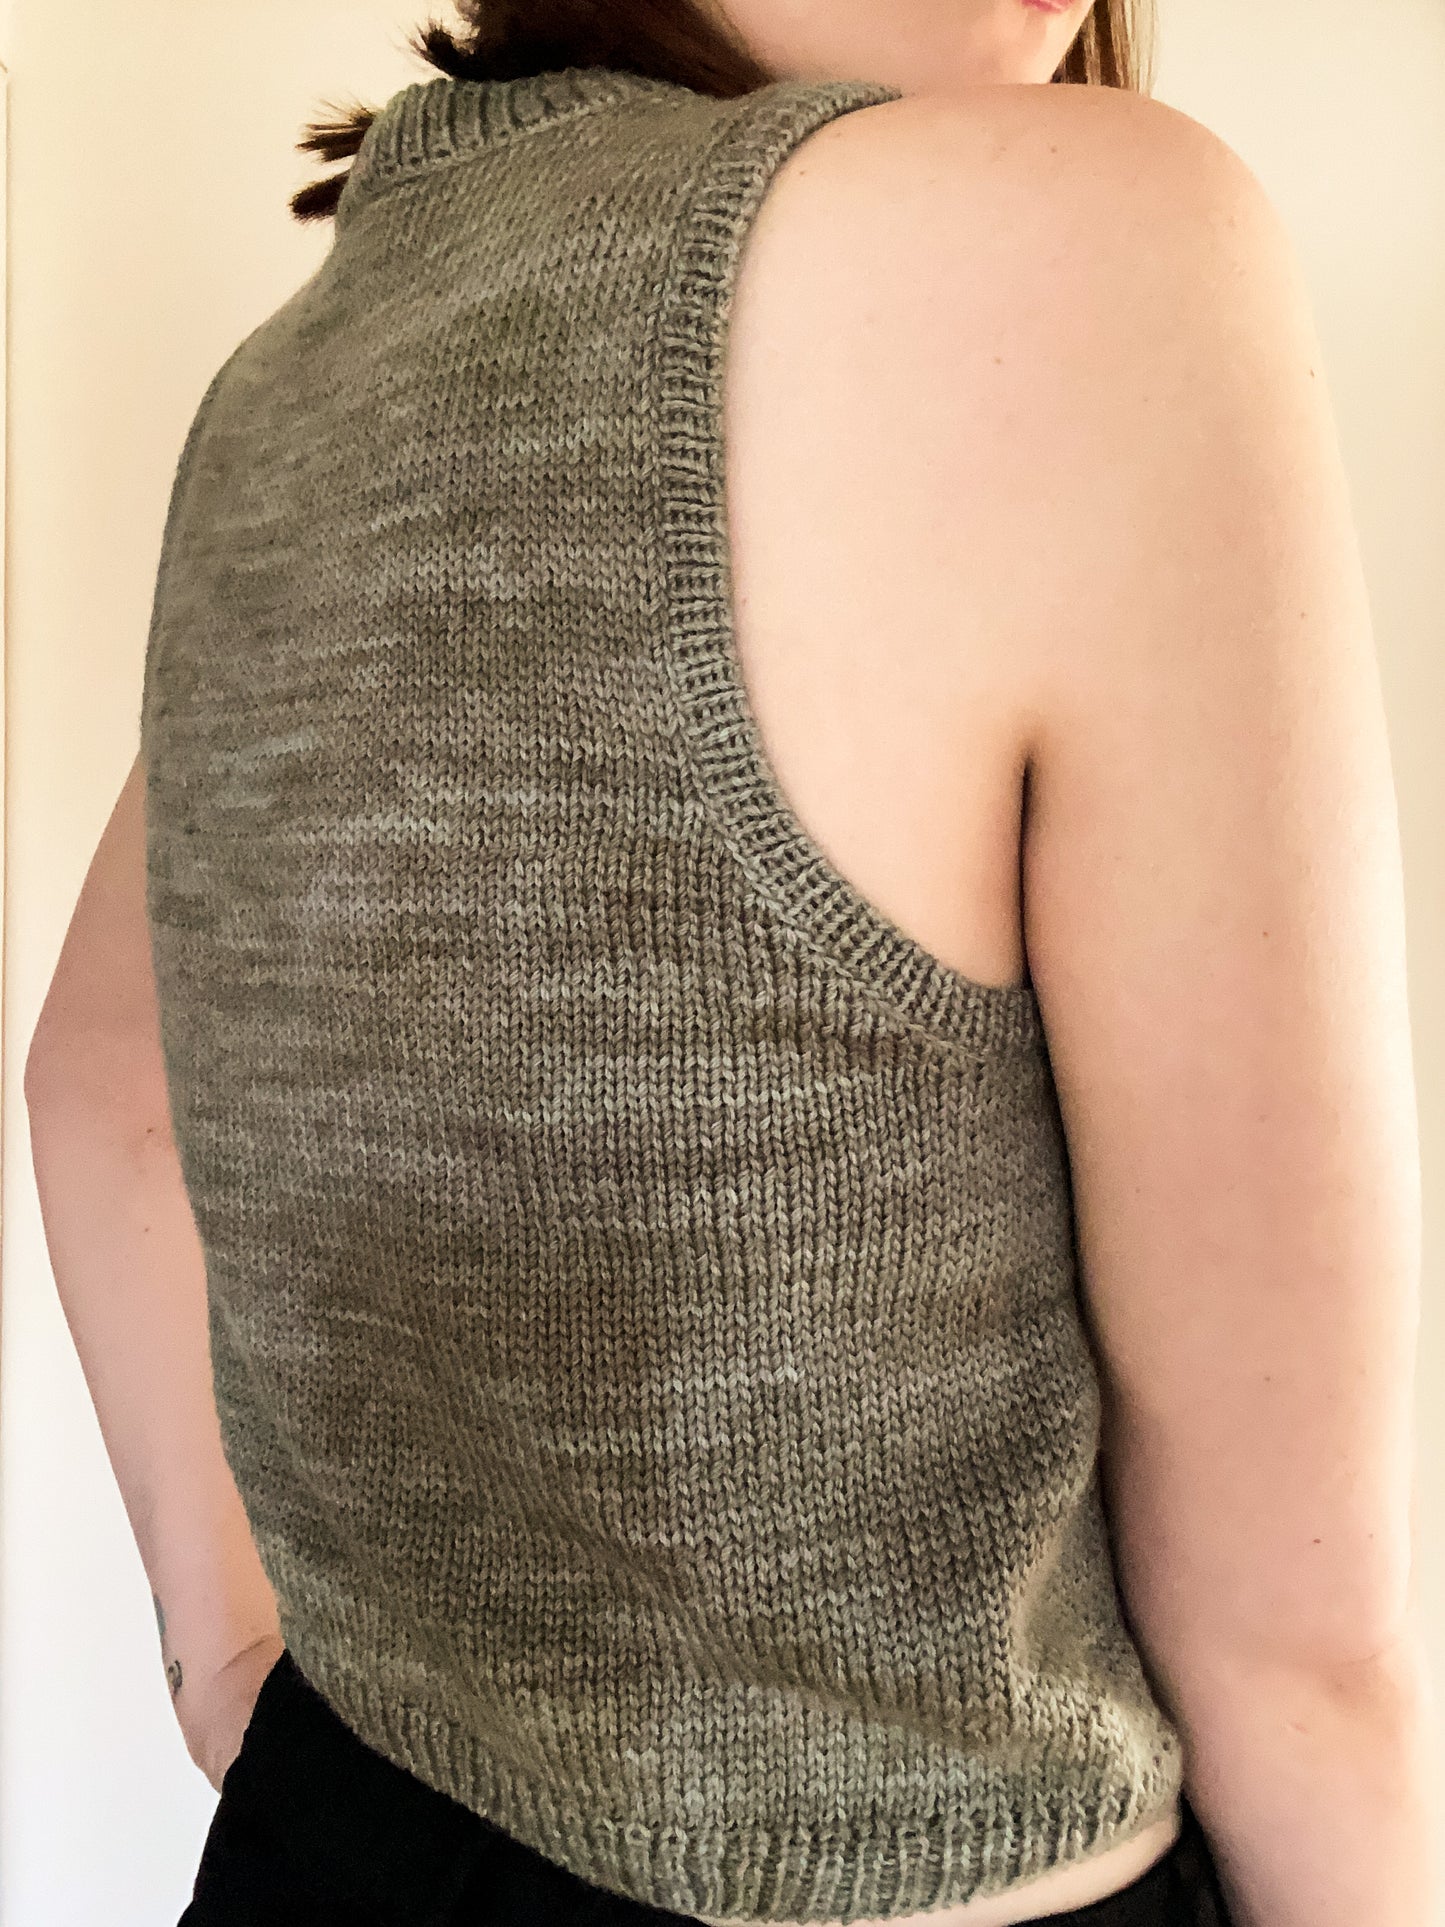 Simply the Vest Knitting Pattern